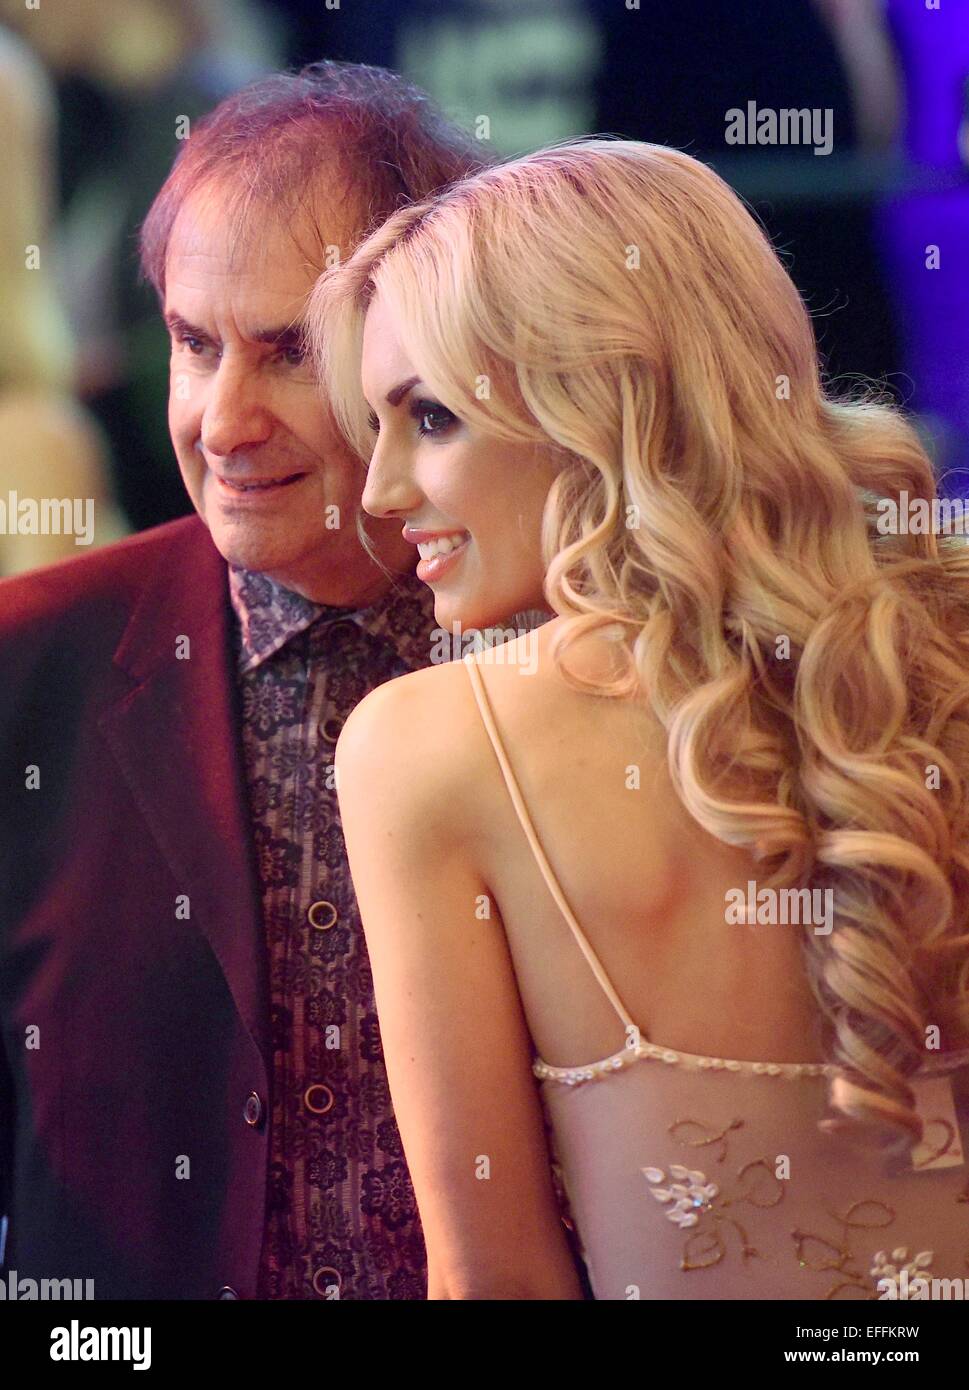 Cologne, Germany. 2nd Feb, 2015. Irish singer Chris de Burgh and his daughter model Rosanna Davison arrive for the Lambertz Monday Night in Cologne, Germany, 2 February 2015. Models presented fashion creations decorated with chocolate during the 'Chocolate and Fashion' show, sponsored by chocolate manufacturer Lambertz. Photo:Henning Kaiser/dpa/Alamy Live News Stock Photo